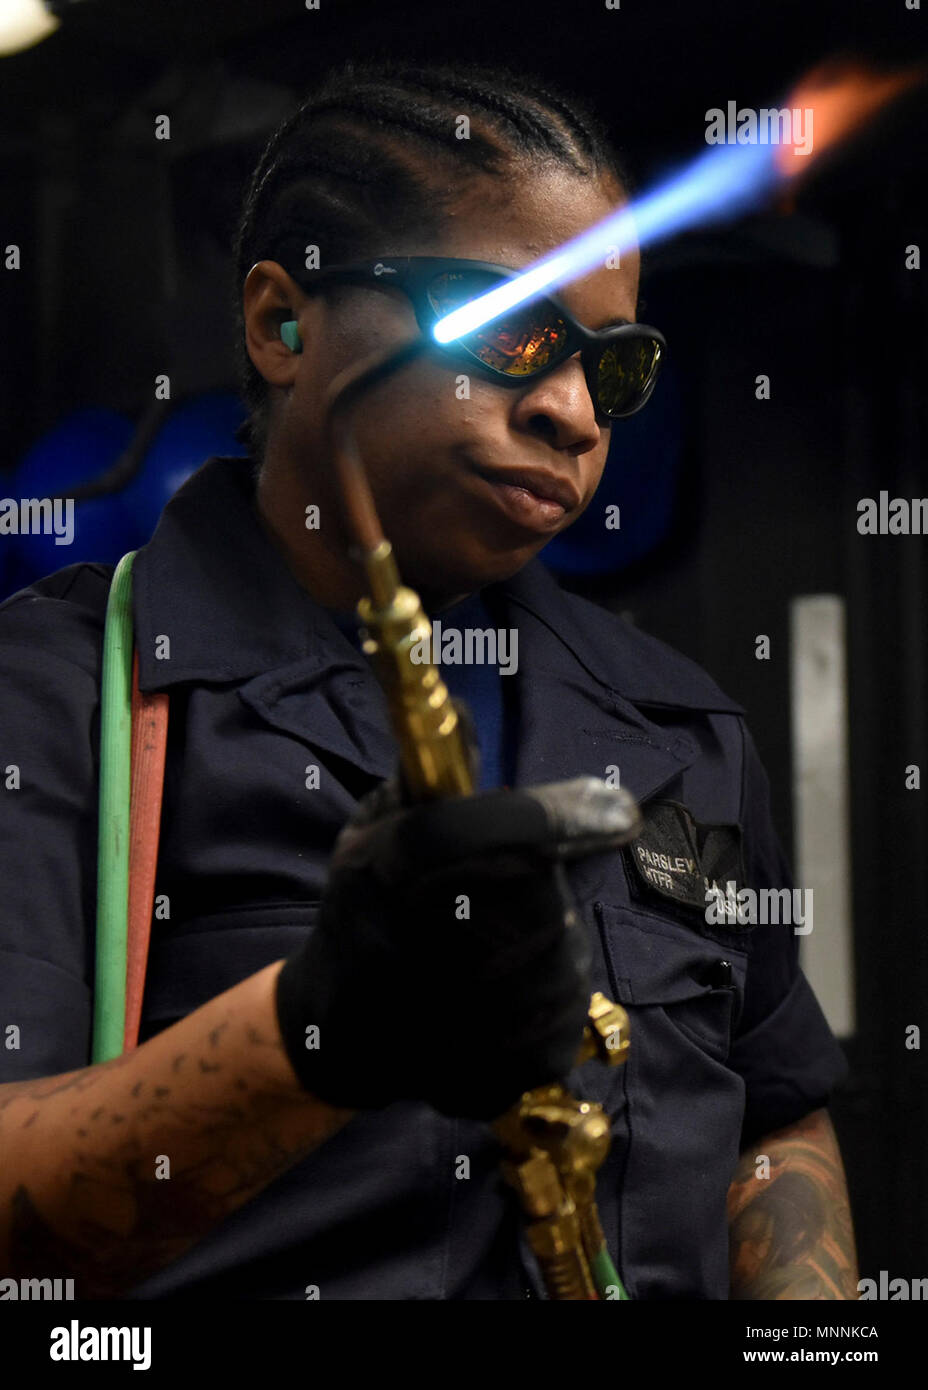 YOKOSUKA, Japan (March 16, 2018) -  Hull Maintenance Technician Fireman Cola Parsley, from New York City, attached to the USS Blue Ridge (LCC 19), makes pipe repairs by silver brazing. Silver brazing is the process of joining two pieces of metal using thin film of silver brazing filler metal. Blue Ridge and her crew have now entered a final upkeep and training phase in preparation to become fully mission capable for operations. Stock Photo